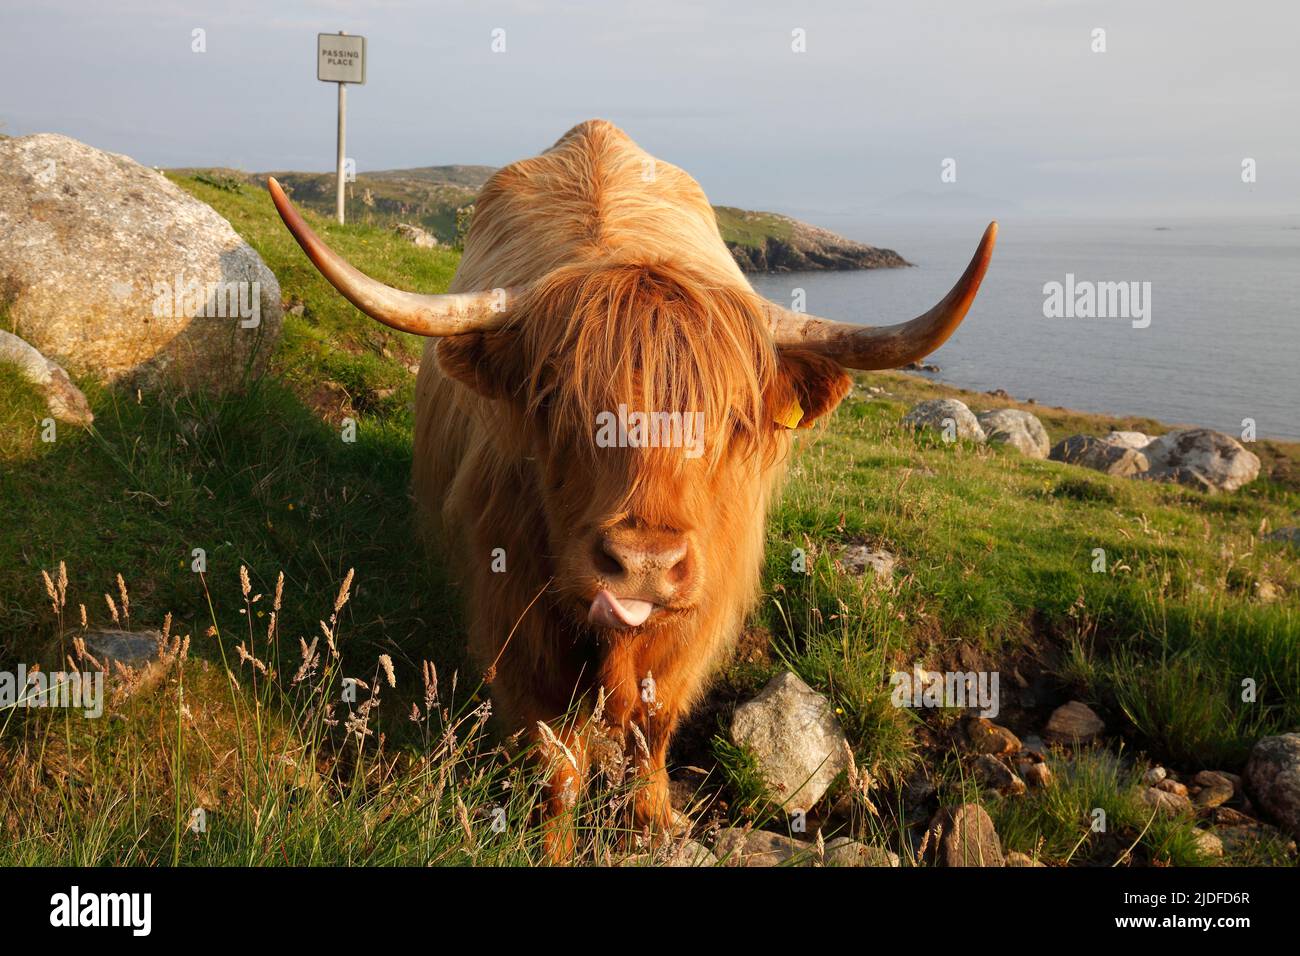 Highland cattle in Huisnis,Isle of Lewis, The Outer Hebrides, Scotland; The Highland, Scottish Gaelic: Bò Ghàidhealach; Hielan coo, Stock Photo